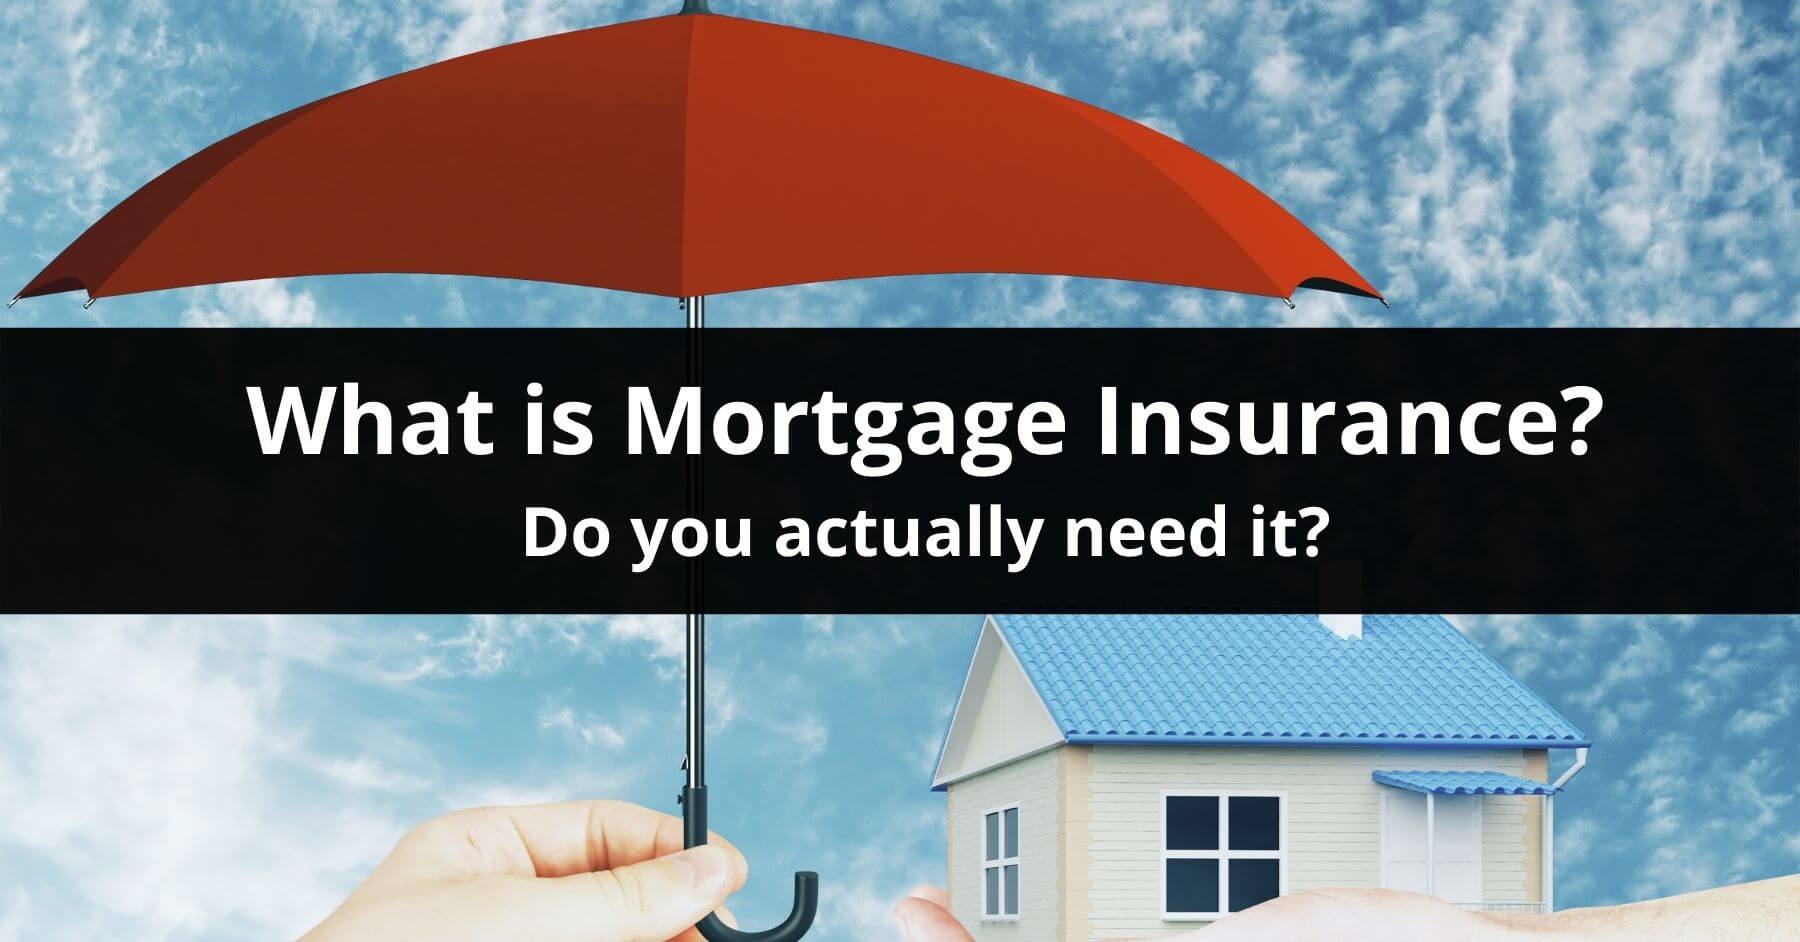 What is Mortgage Insurance